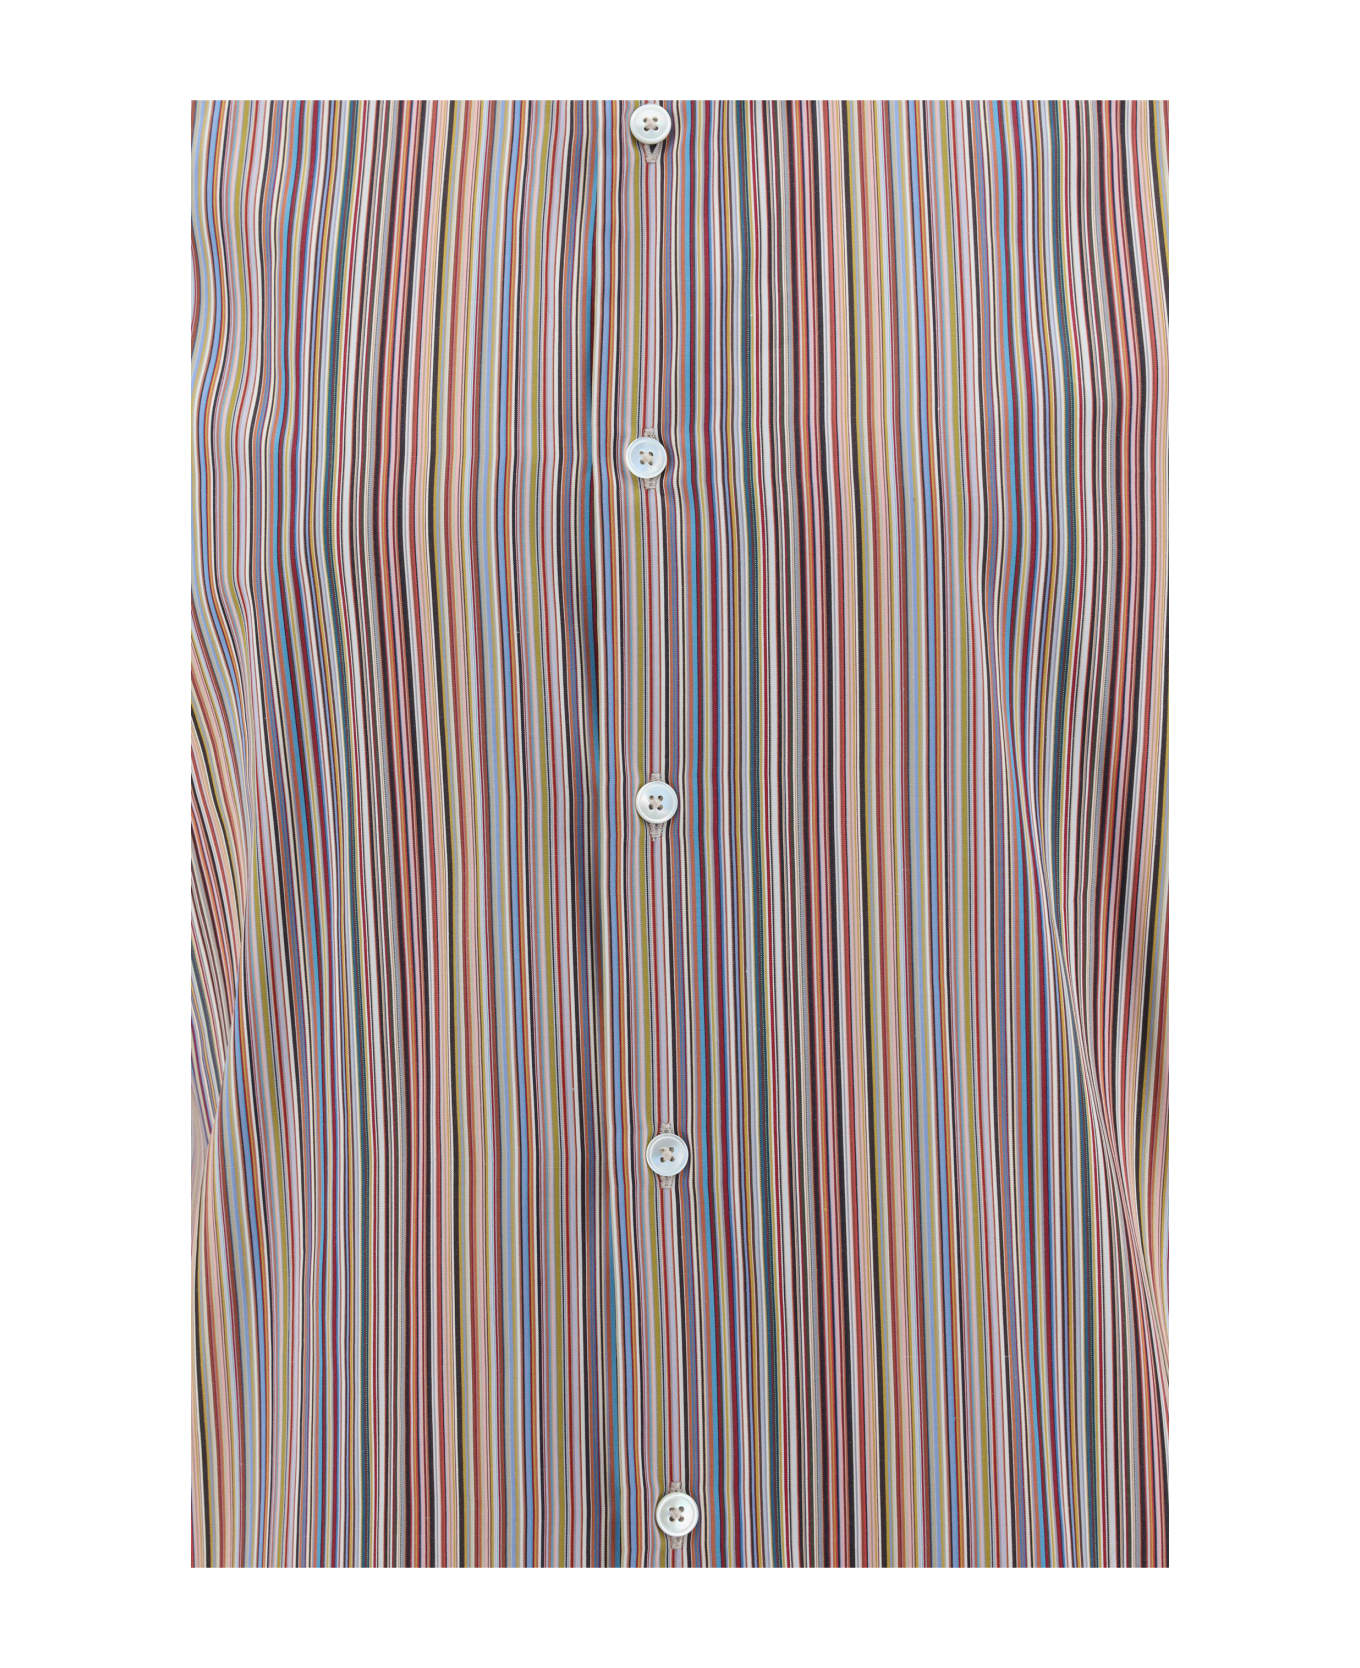 PS by Paul Smith Shirt Shirt - MULTI COLOURED シャツ